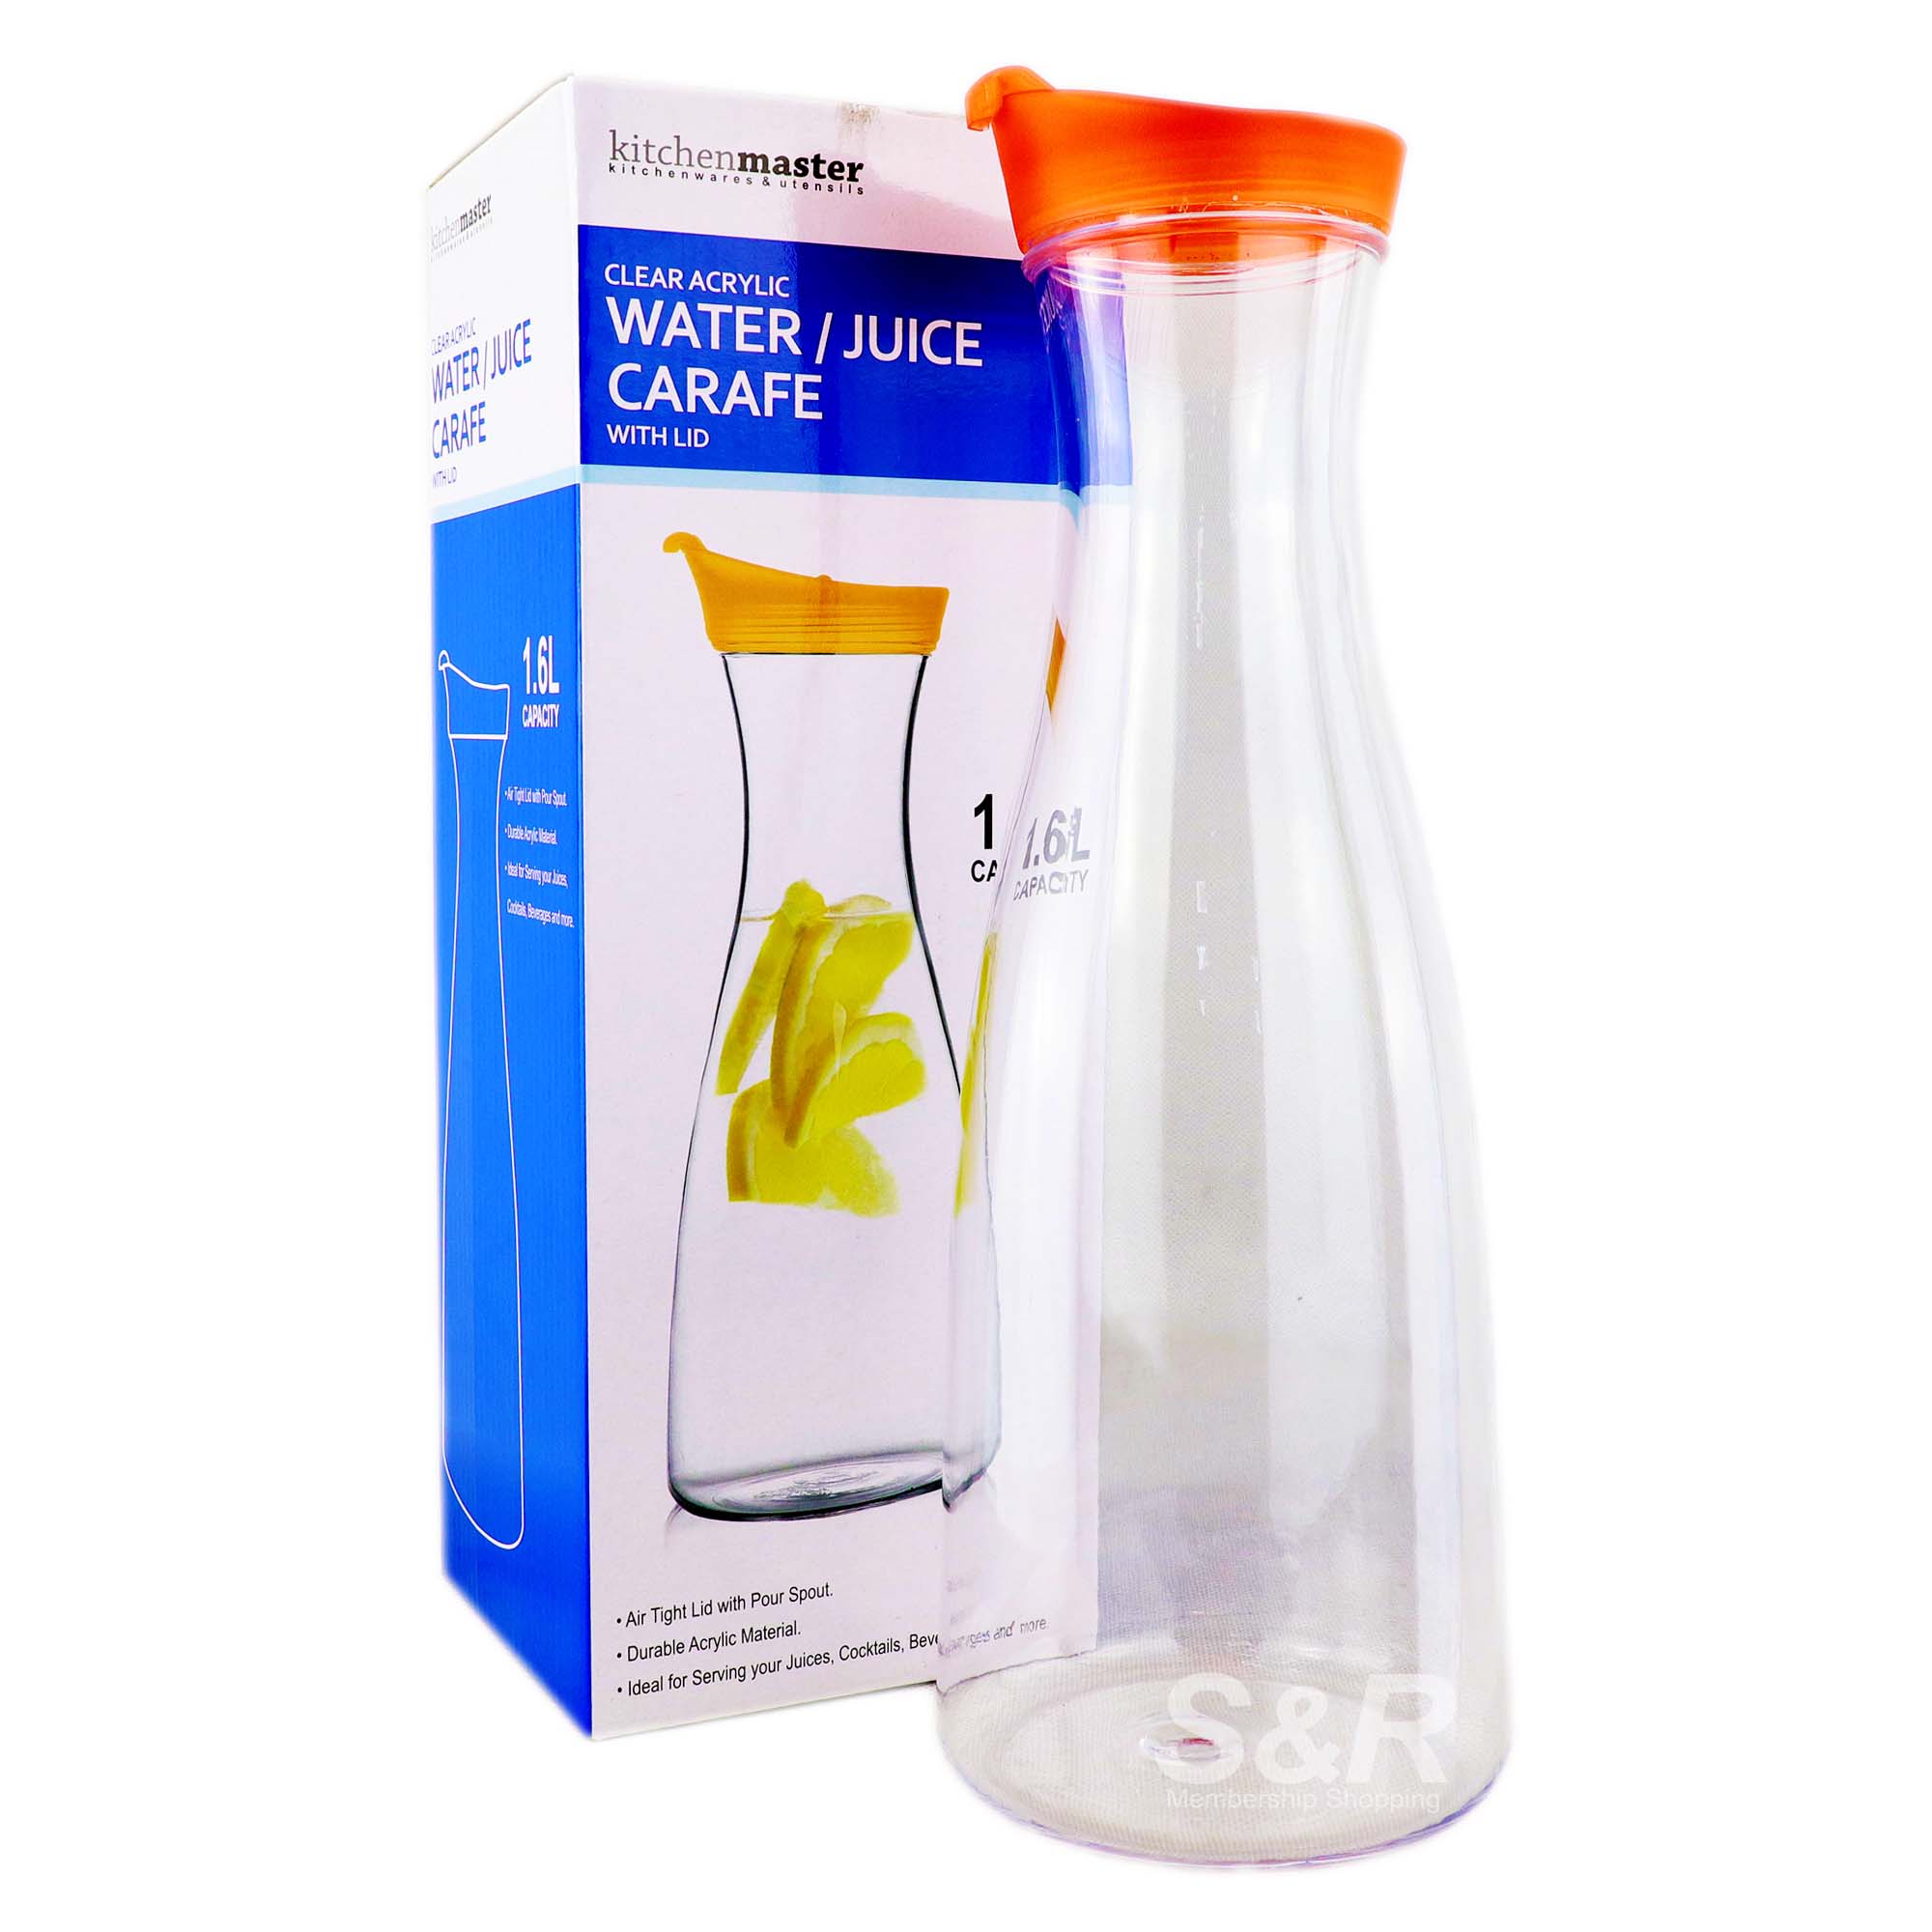 Clear Acrylic Water/Juice Carafe